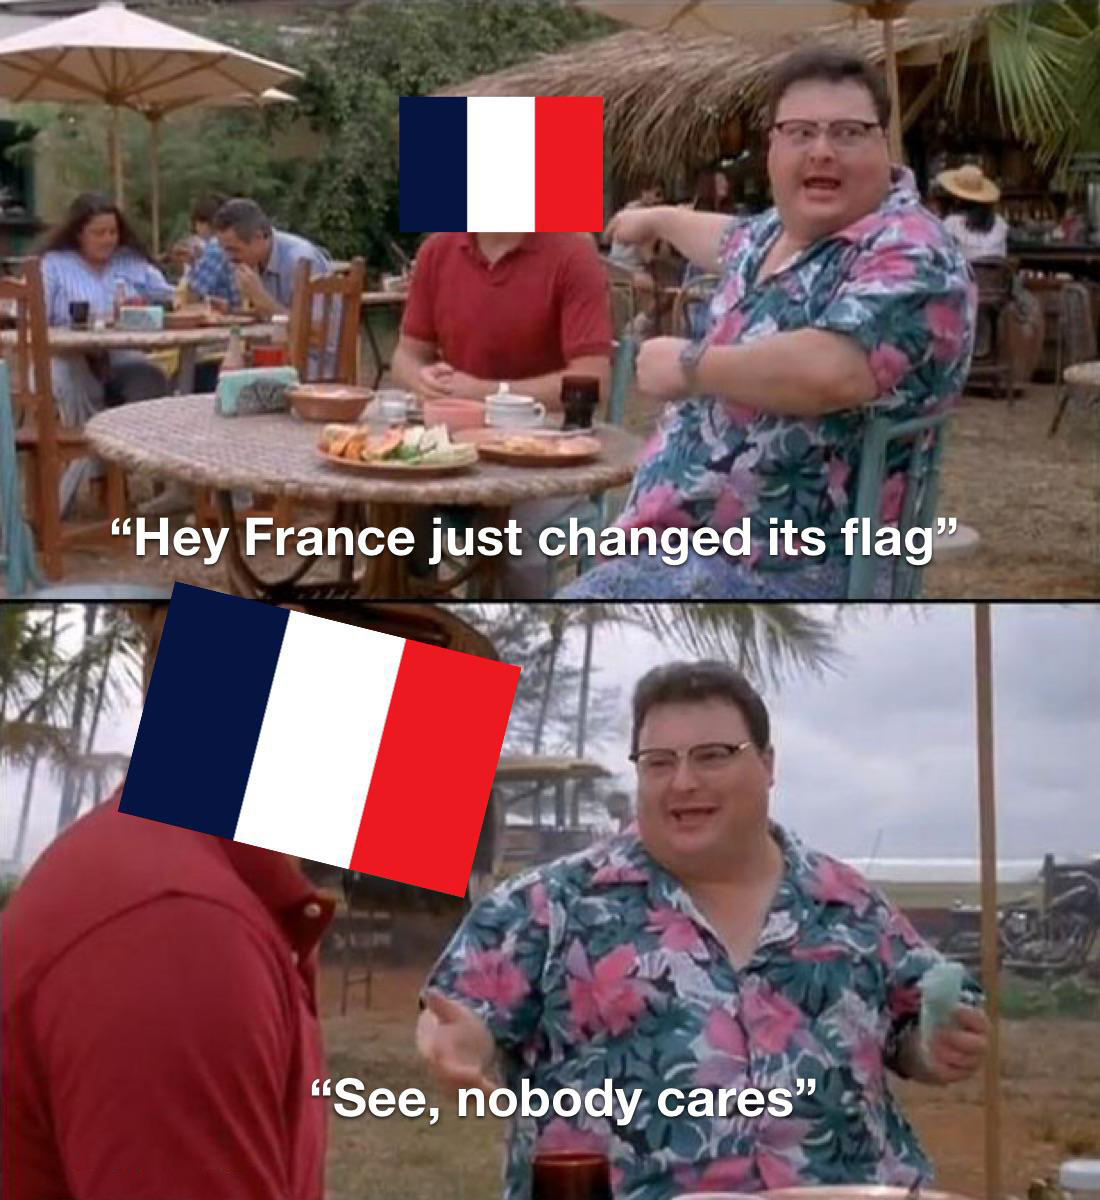 dank memes - funny memes - see nobody cares meme - "Hey France just changed its flag" "See, nobody cares"